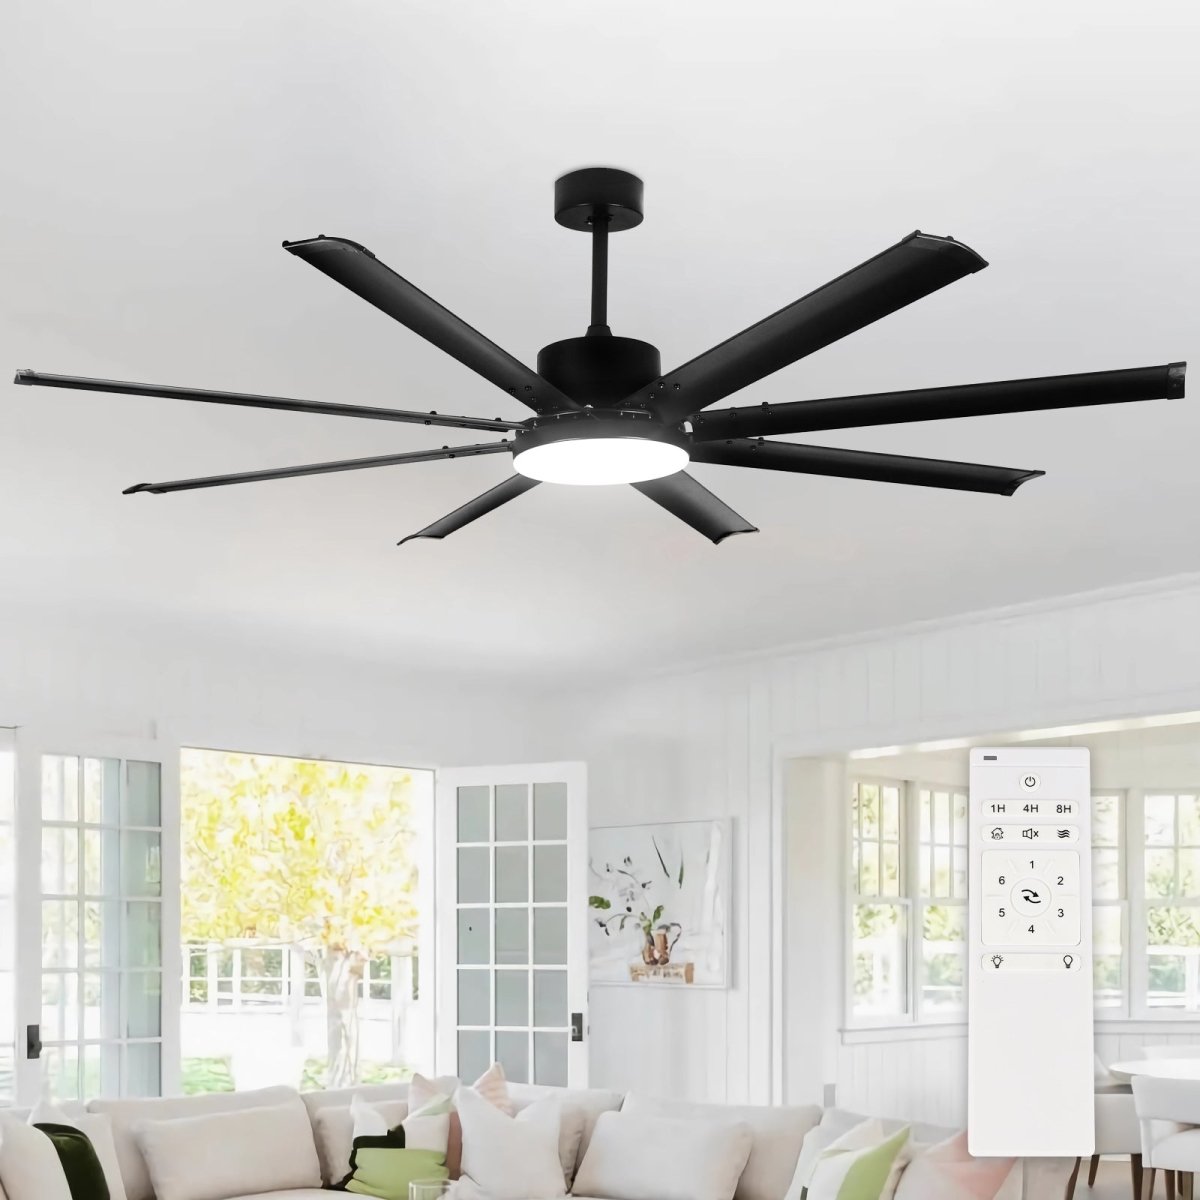 72" Large Ceiling Fan with Lights and Remote Control, Farmhouse Black LED Ceiling Fan, Reversible Motor and 8 Aluminum Blades, 3CCT Selectable Fan Lights for Living Room Porch Patio, 6-Speed, Timer - WS-FPZ57-24C-8-B 1 | DEPULEY